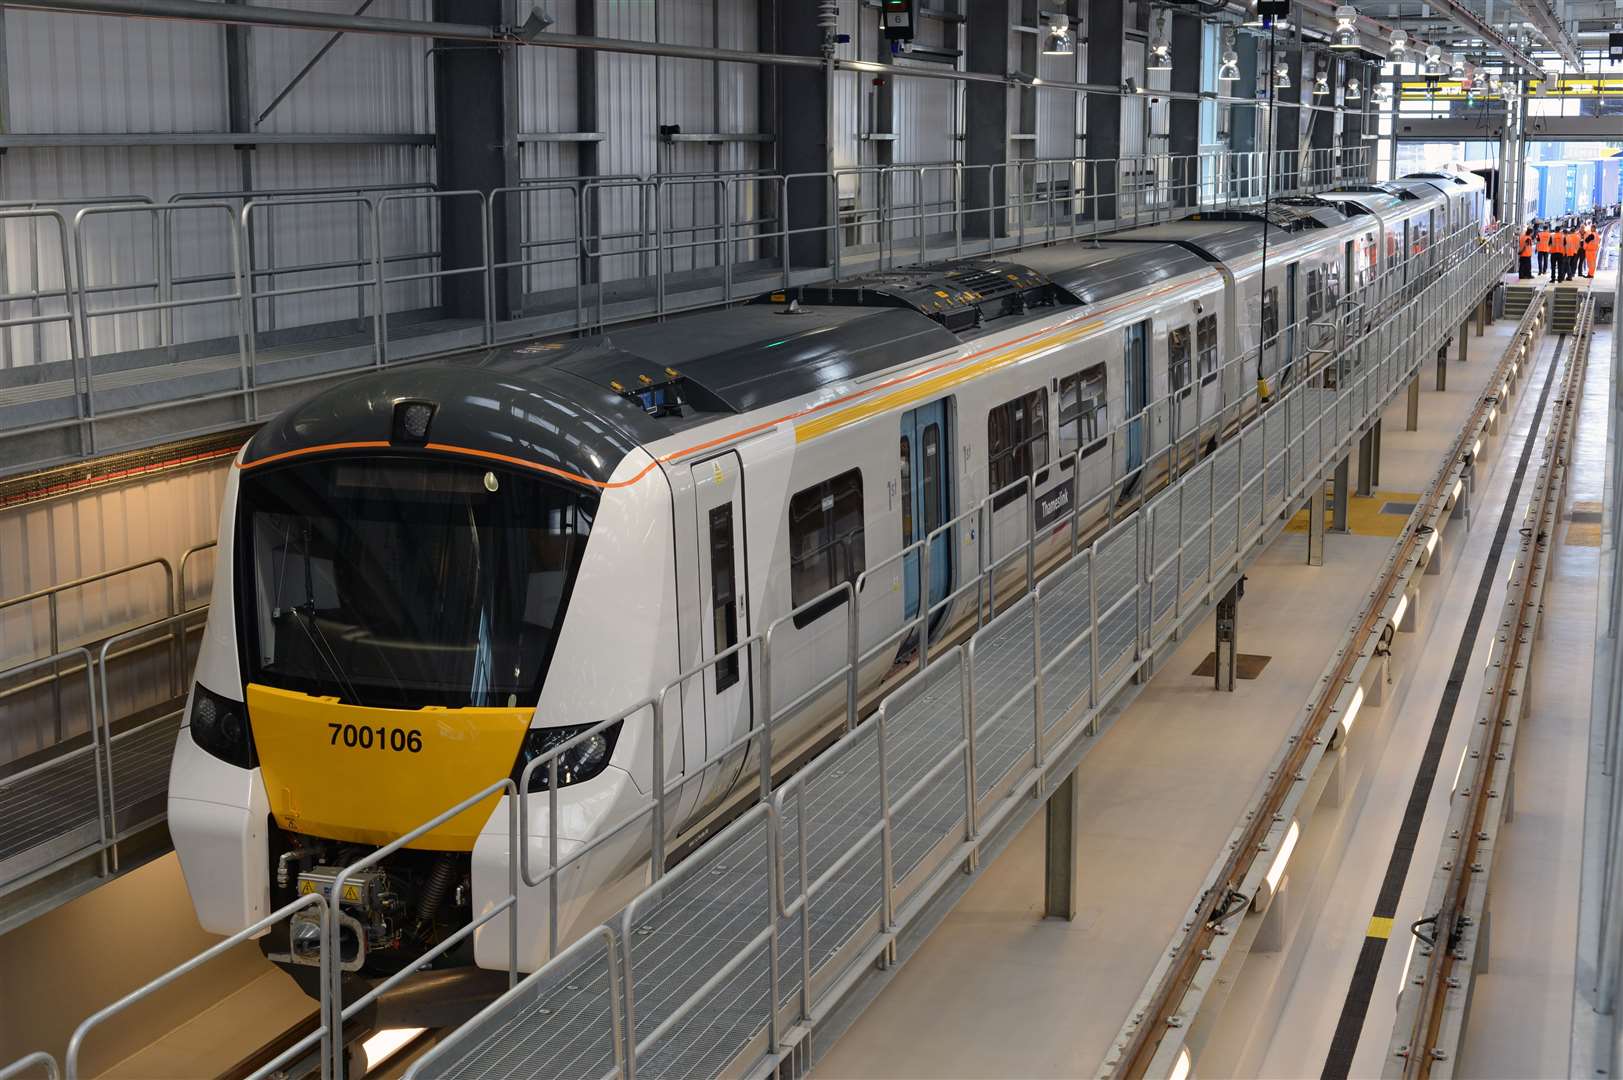 Thameslink is supposed to introduce new trains on Maidstone East line